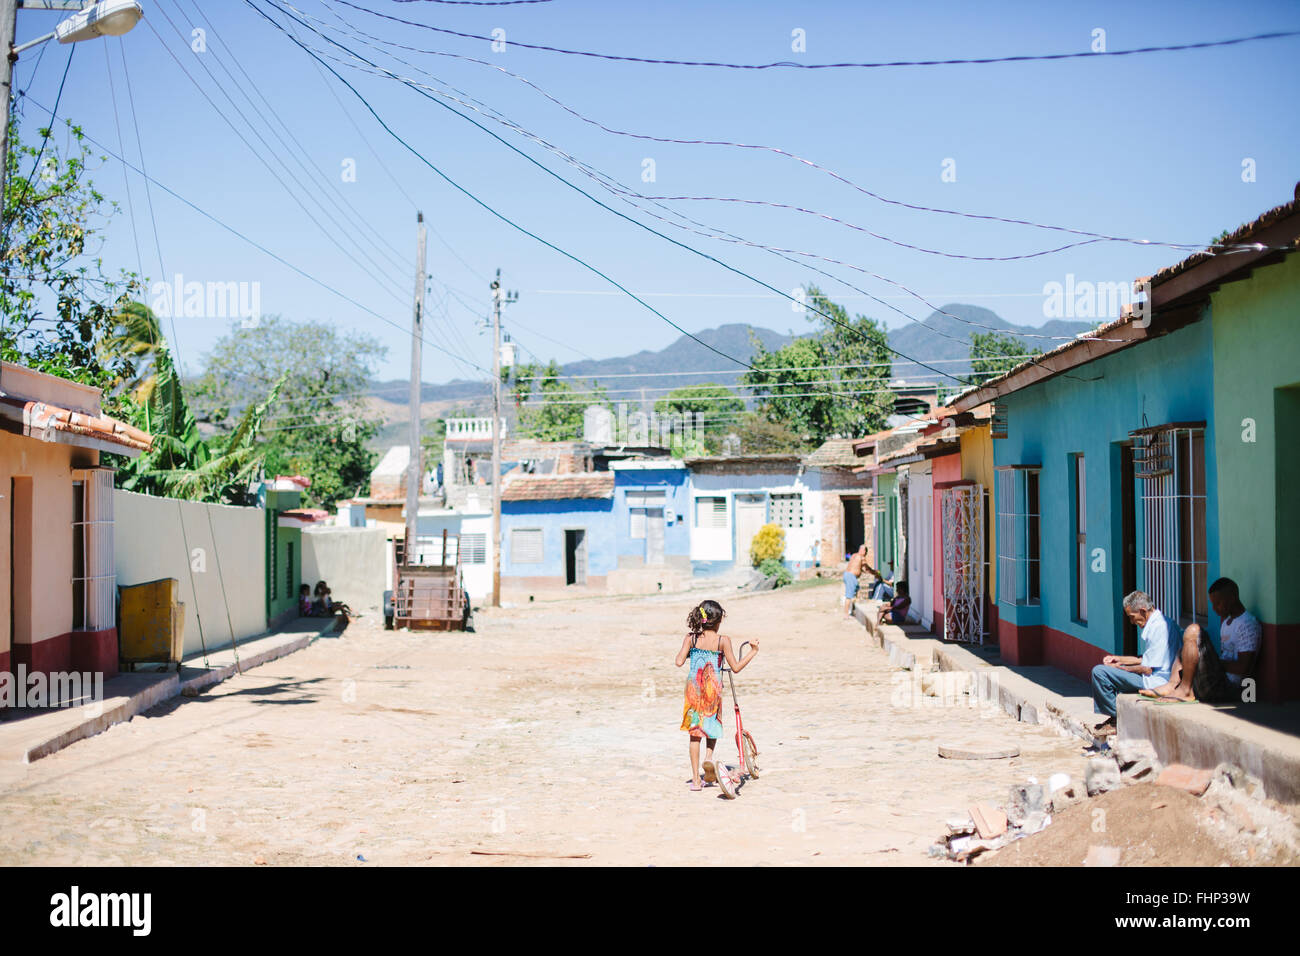 In a poor neighbourhood of Trinidad in Cuba, a girl pushes her scooter down the unpaved street lined by colourful houses Stock Photo